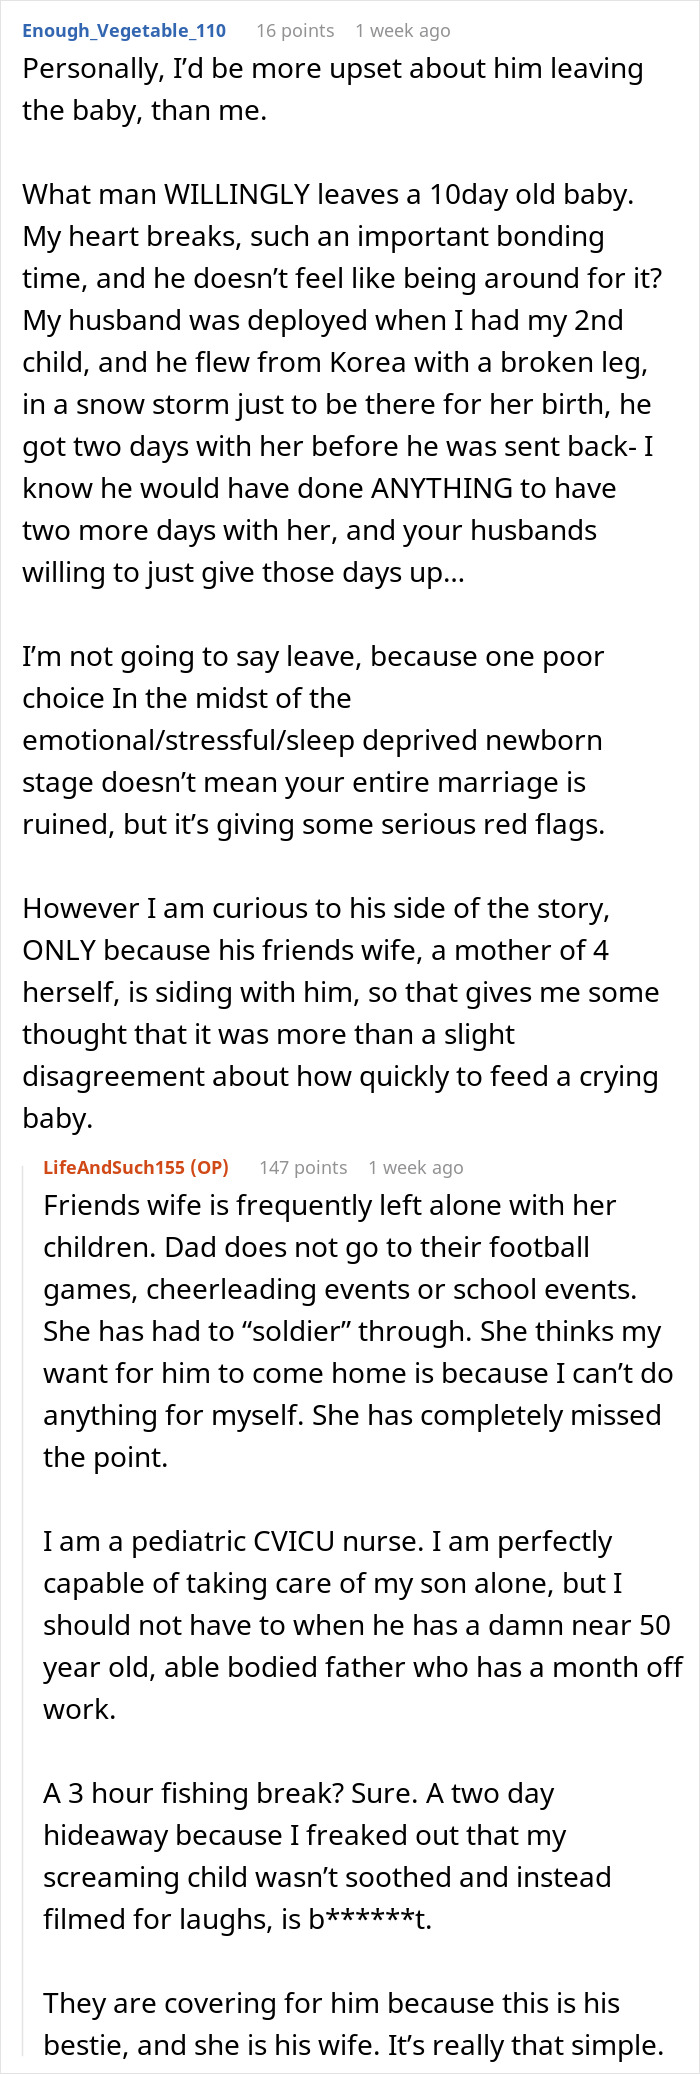 Wife Is Lost And Confused After Her Husband Leaves Her And Their Baby 10 Days After Her C-Section To Stay With His Friends